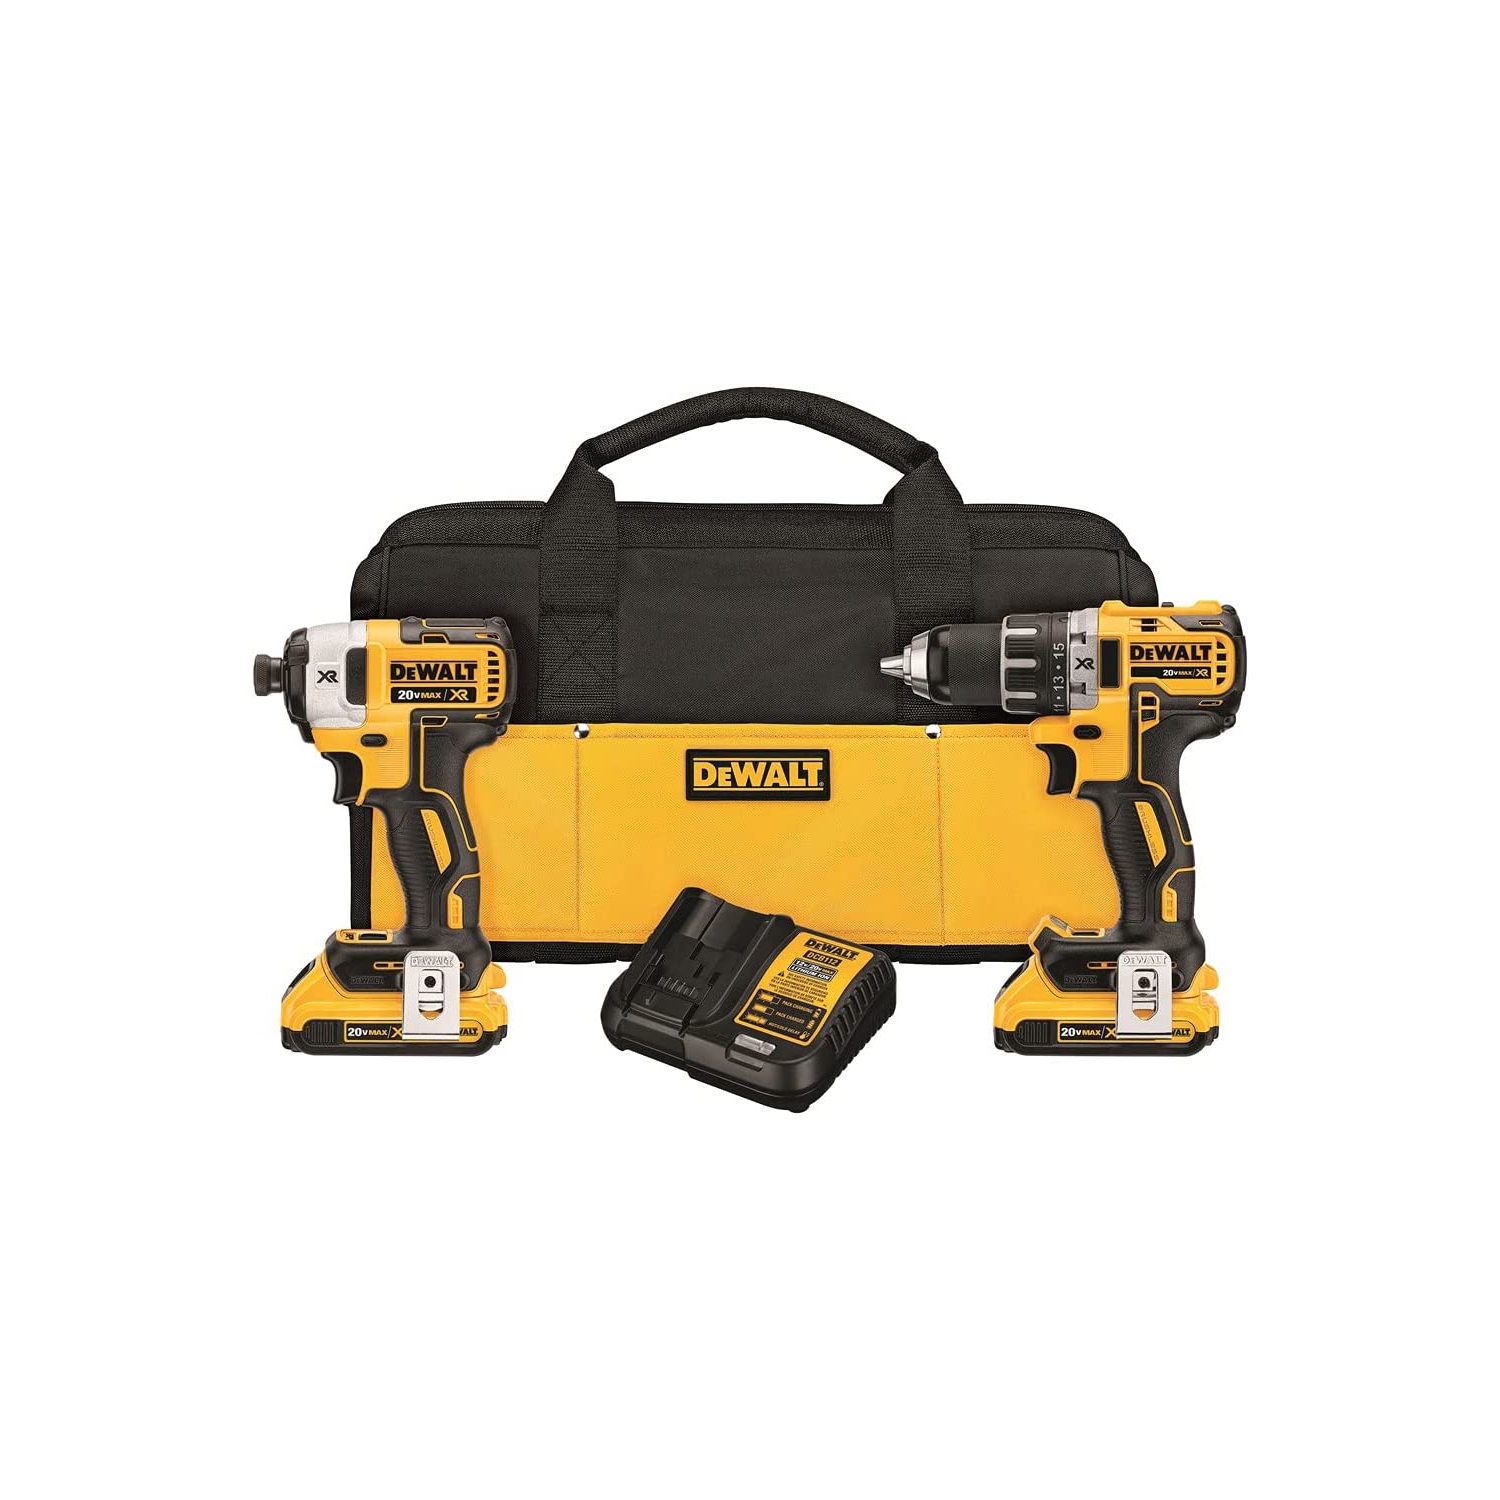 NEW - DEWALT DCK283D2 20-Volt MAX Brushless Compact Drill + 3-speed Impact Driver Combo Kit (2-Tool)